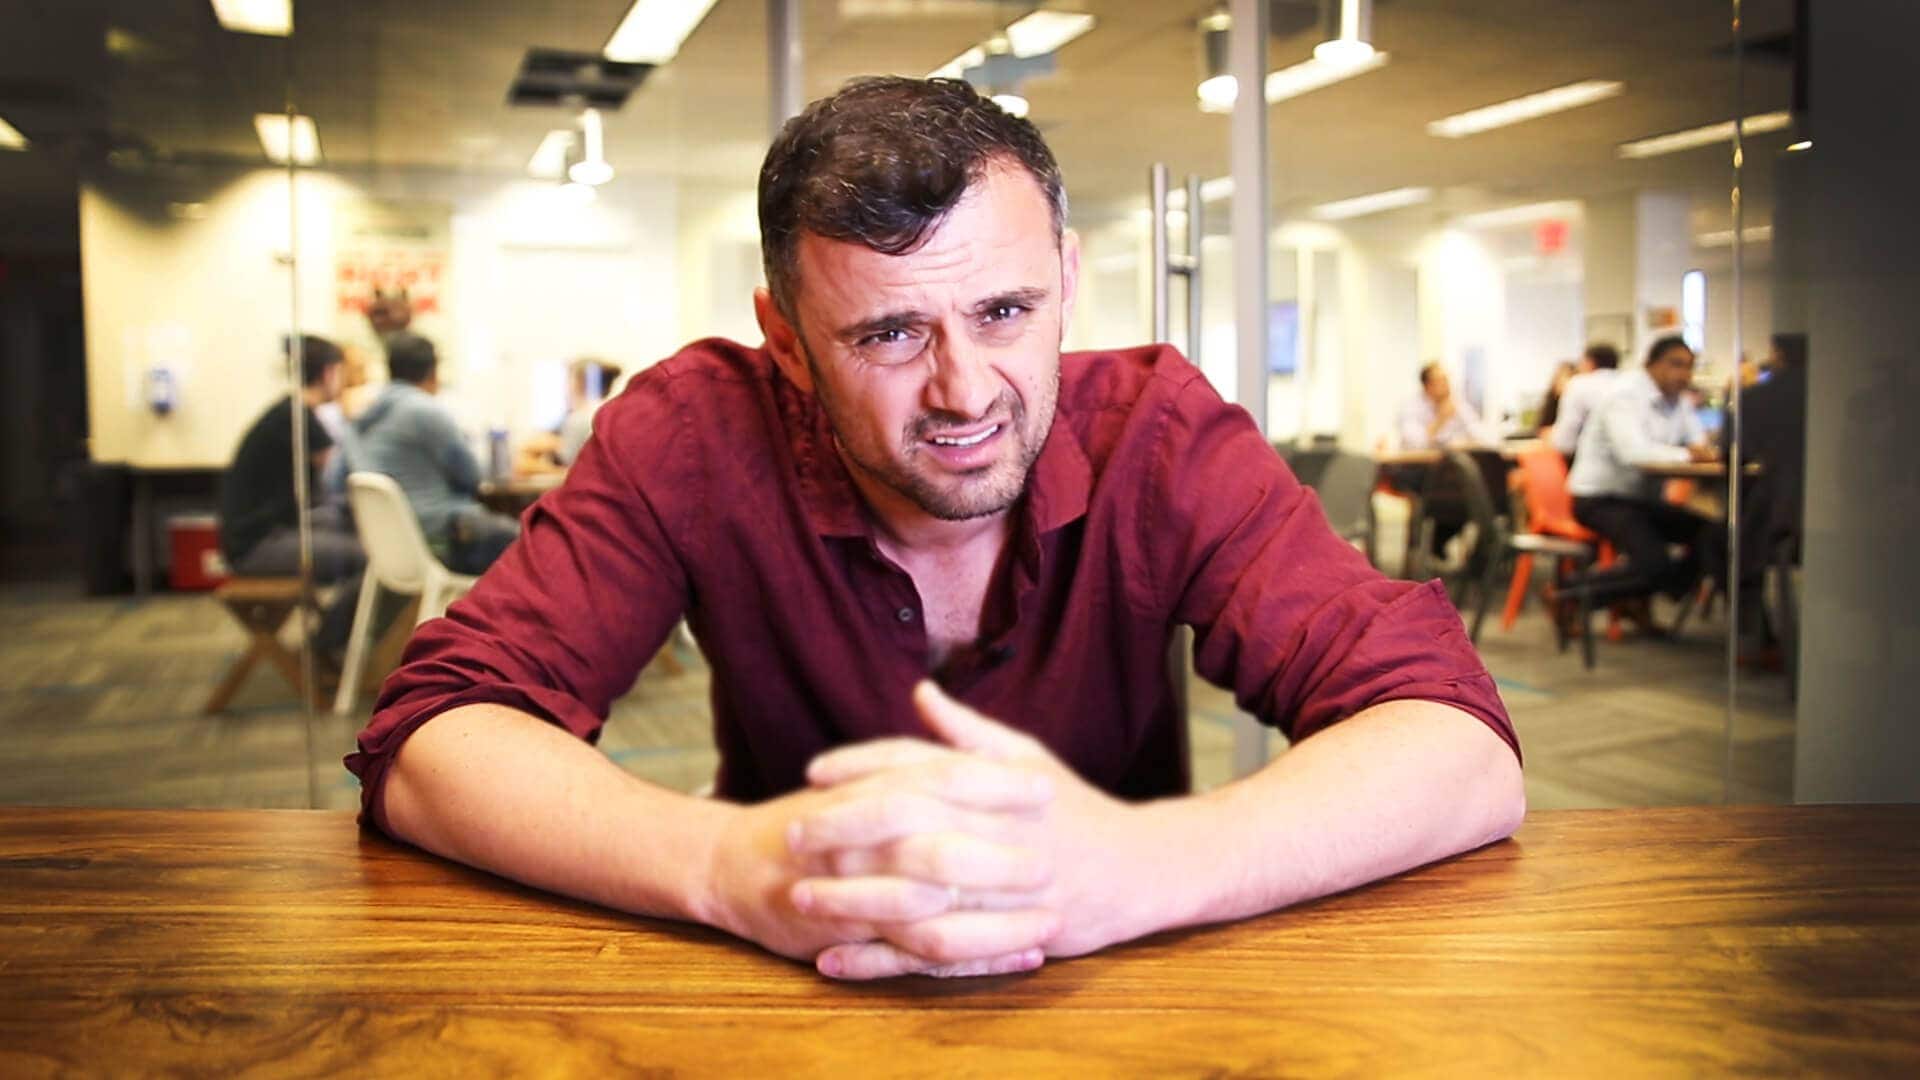 #AskGaryVee Episode 110: Ego, My Grandchildren, & Why People Are Afraid of Snapchat